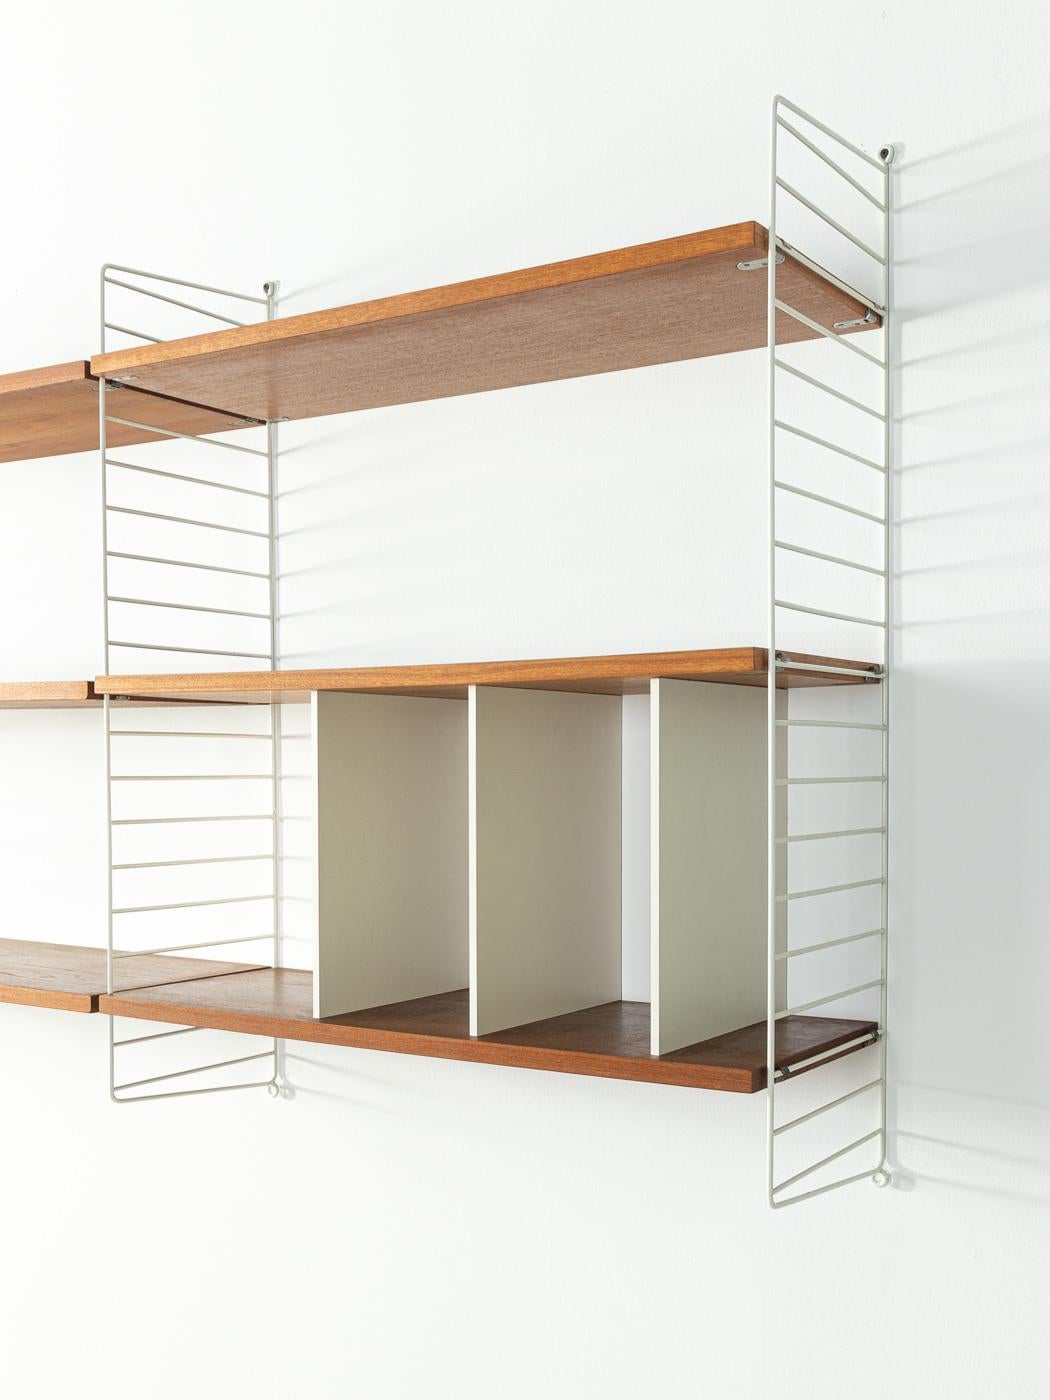 Mid-20th Century 1950s Shelving System by Nils Strinning High Quality